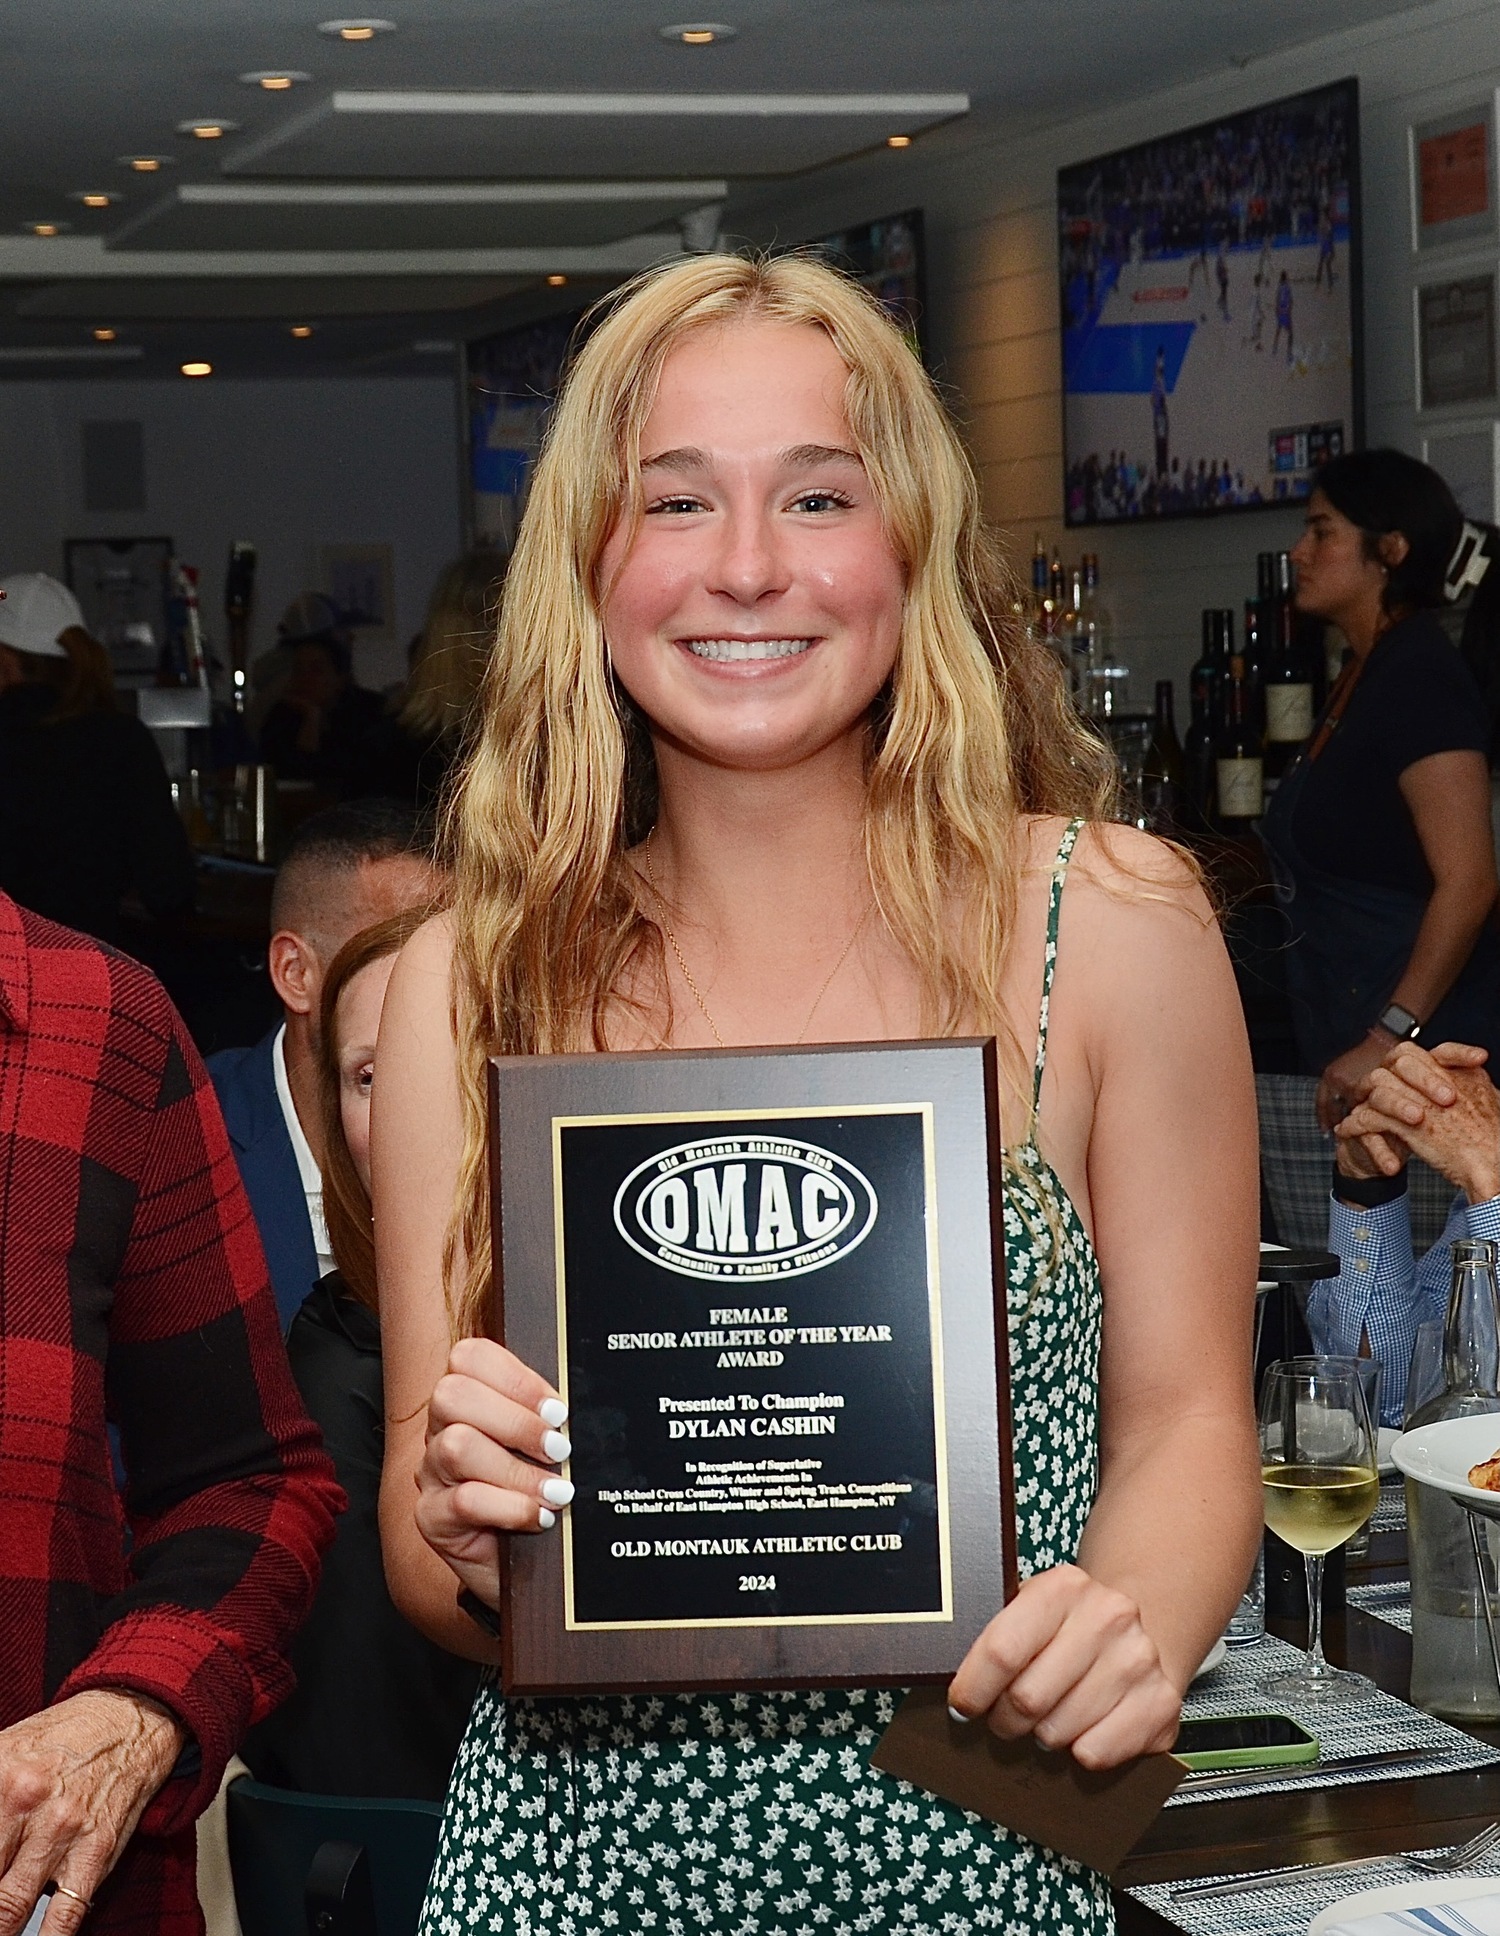 Dylan Cashin was the co-recipient of the Female Senior Athlete of the Year, along with good friend Ryleigh O'Donnell.   KYRIL BROMLEY